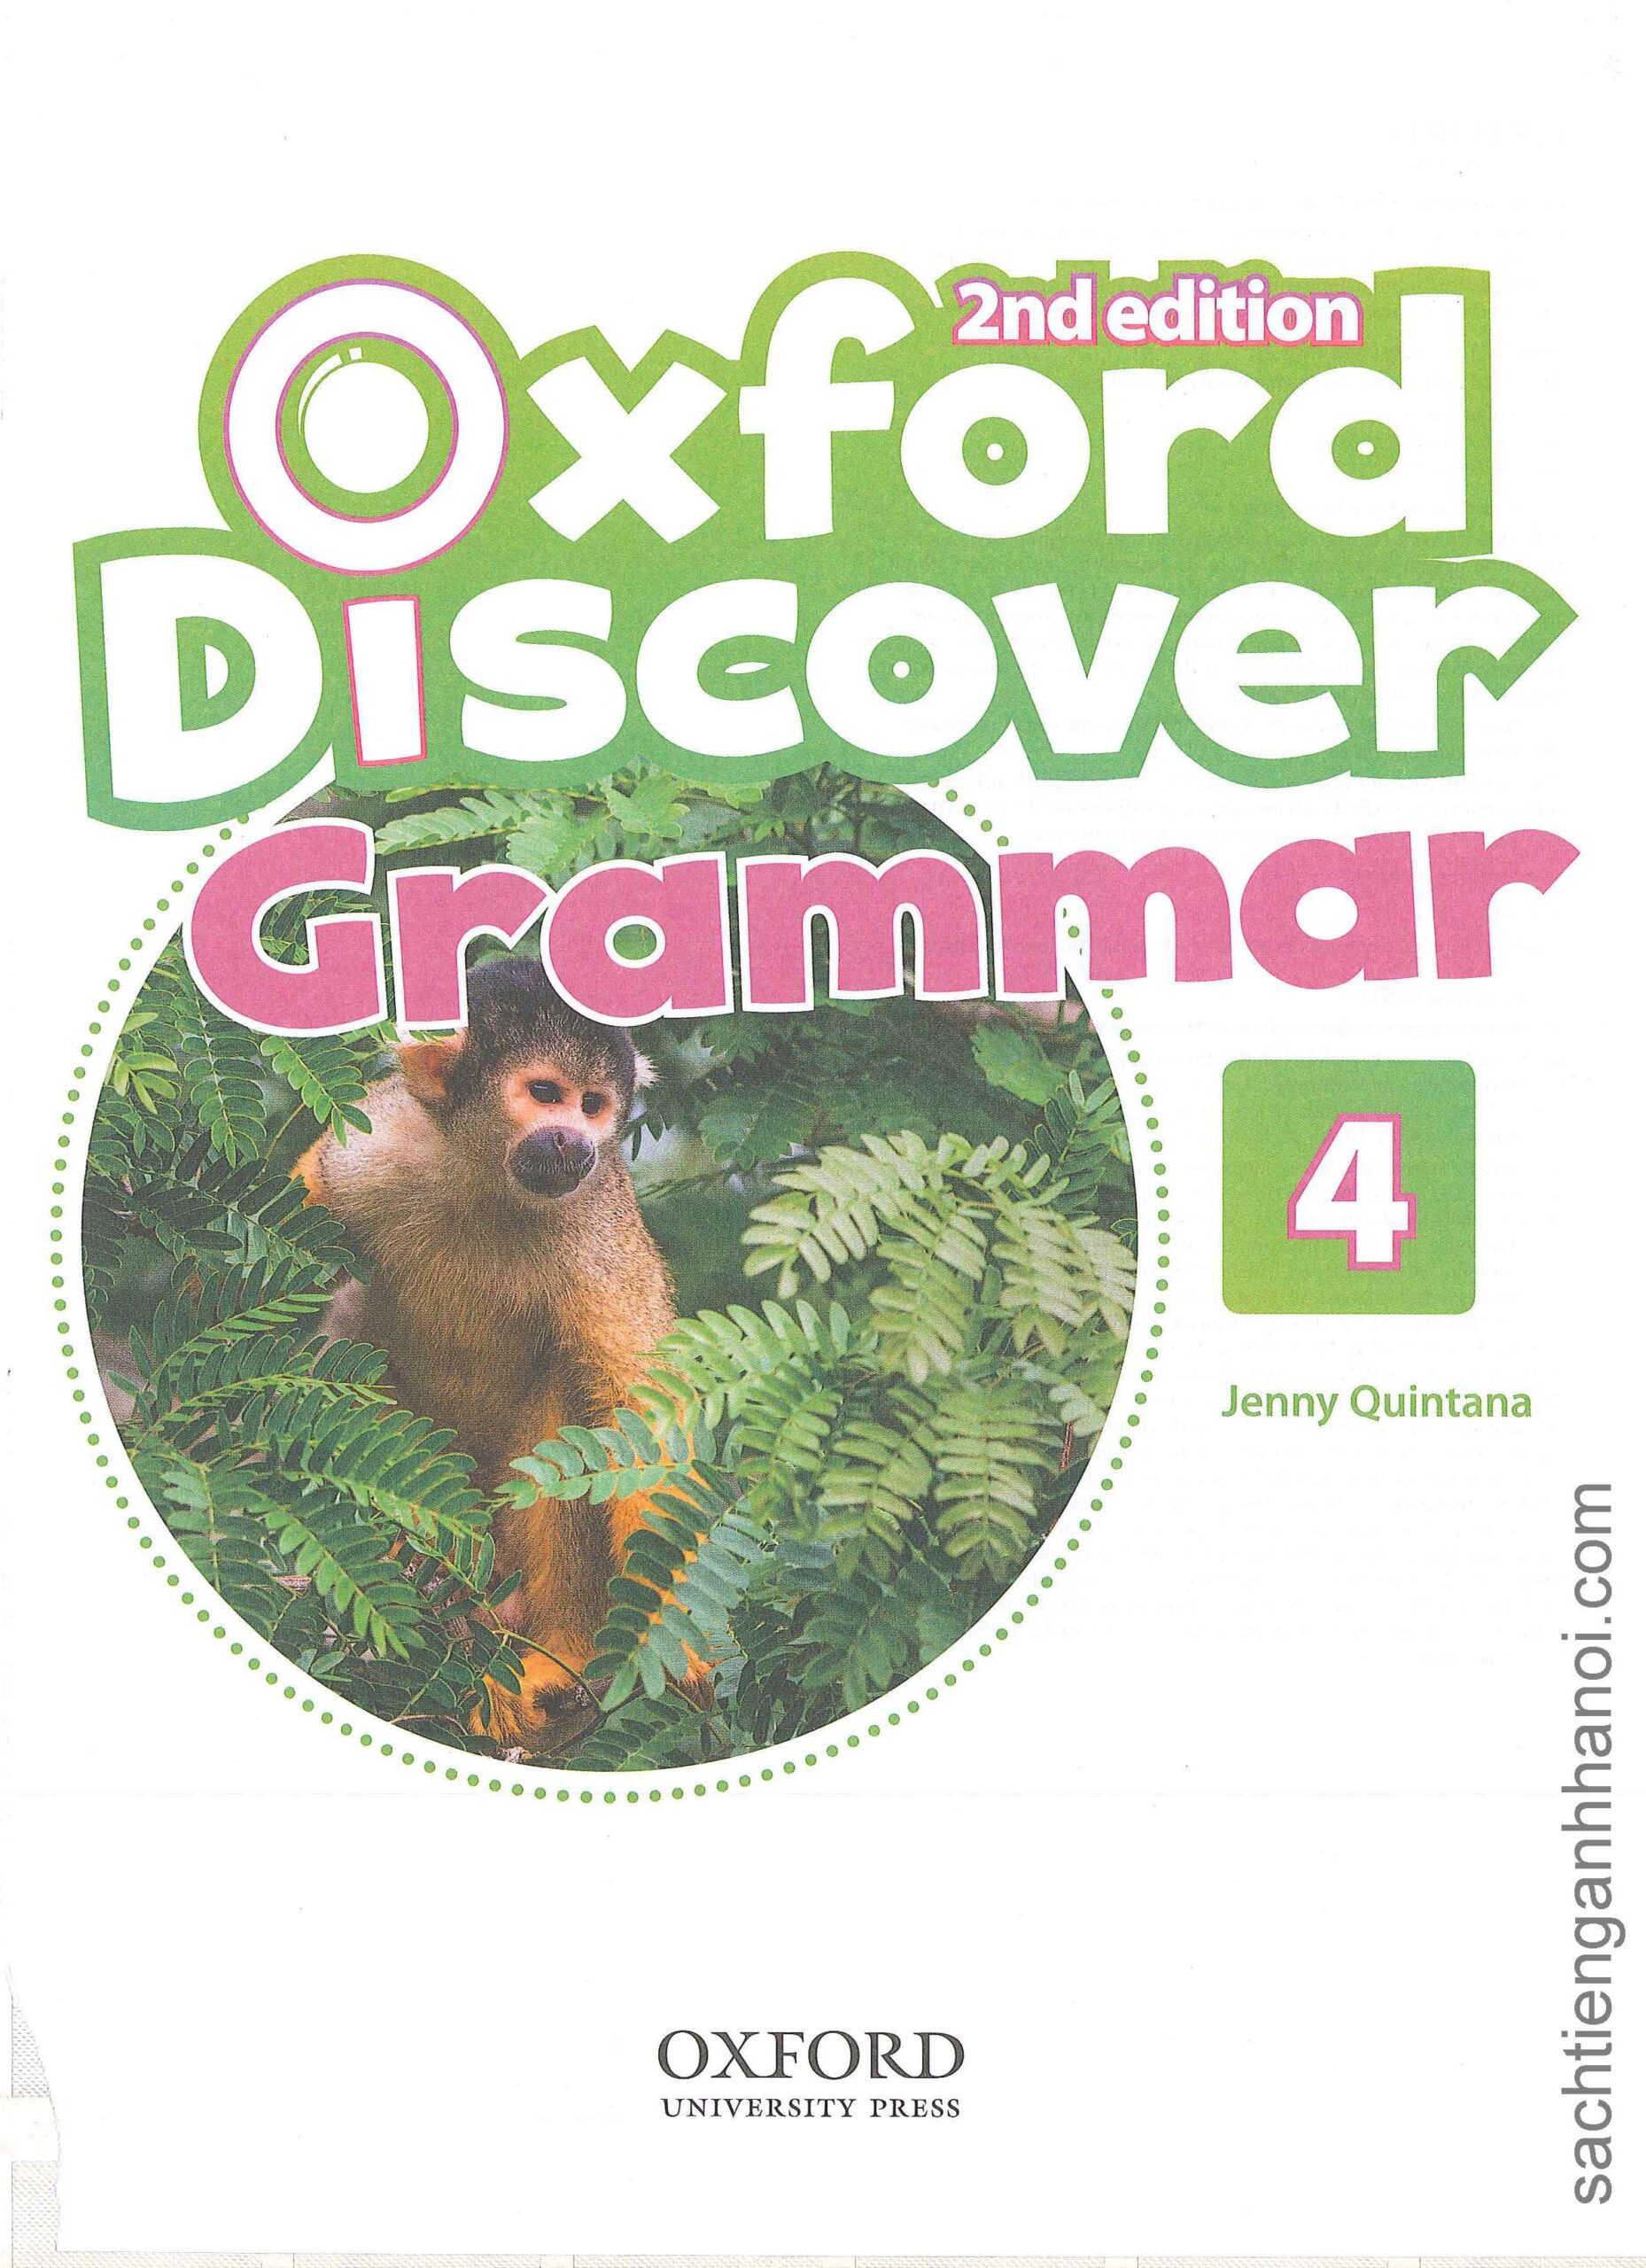 Oxford discover 4 2nd Edition. Oxford discover 2nd Edition. Oxford discover Grammar books. Oxford read and discover. Oxford discover 4